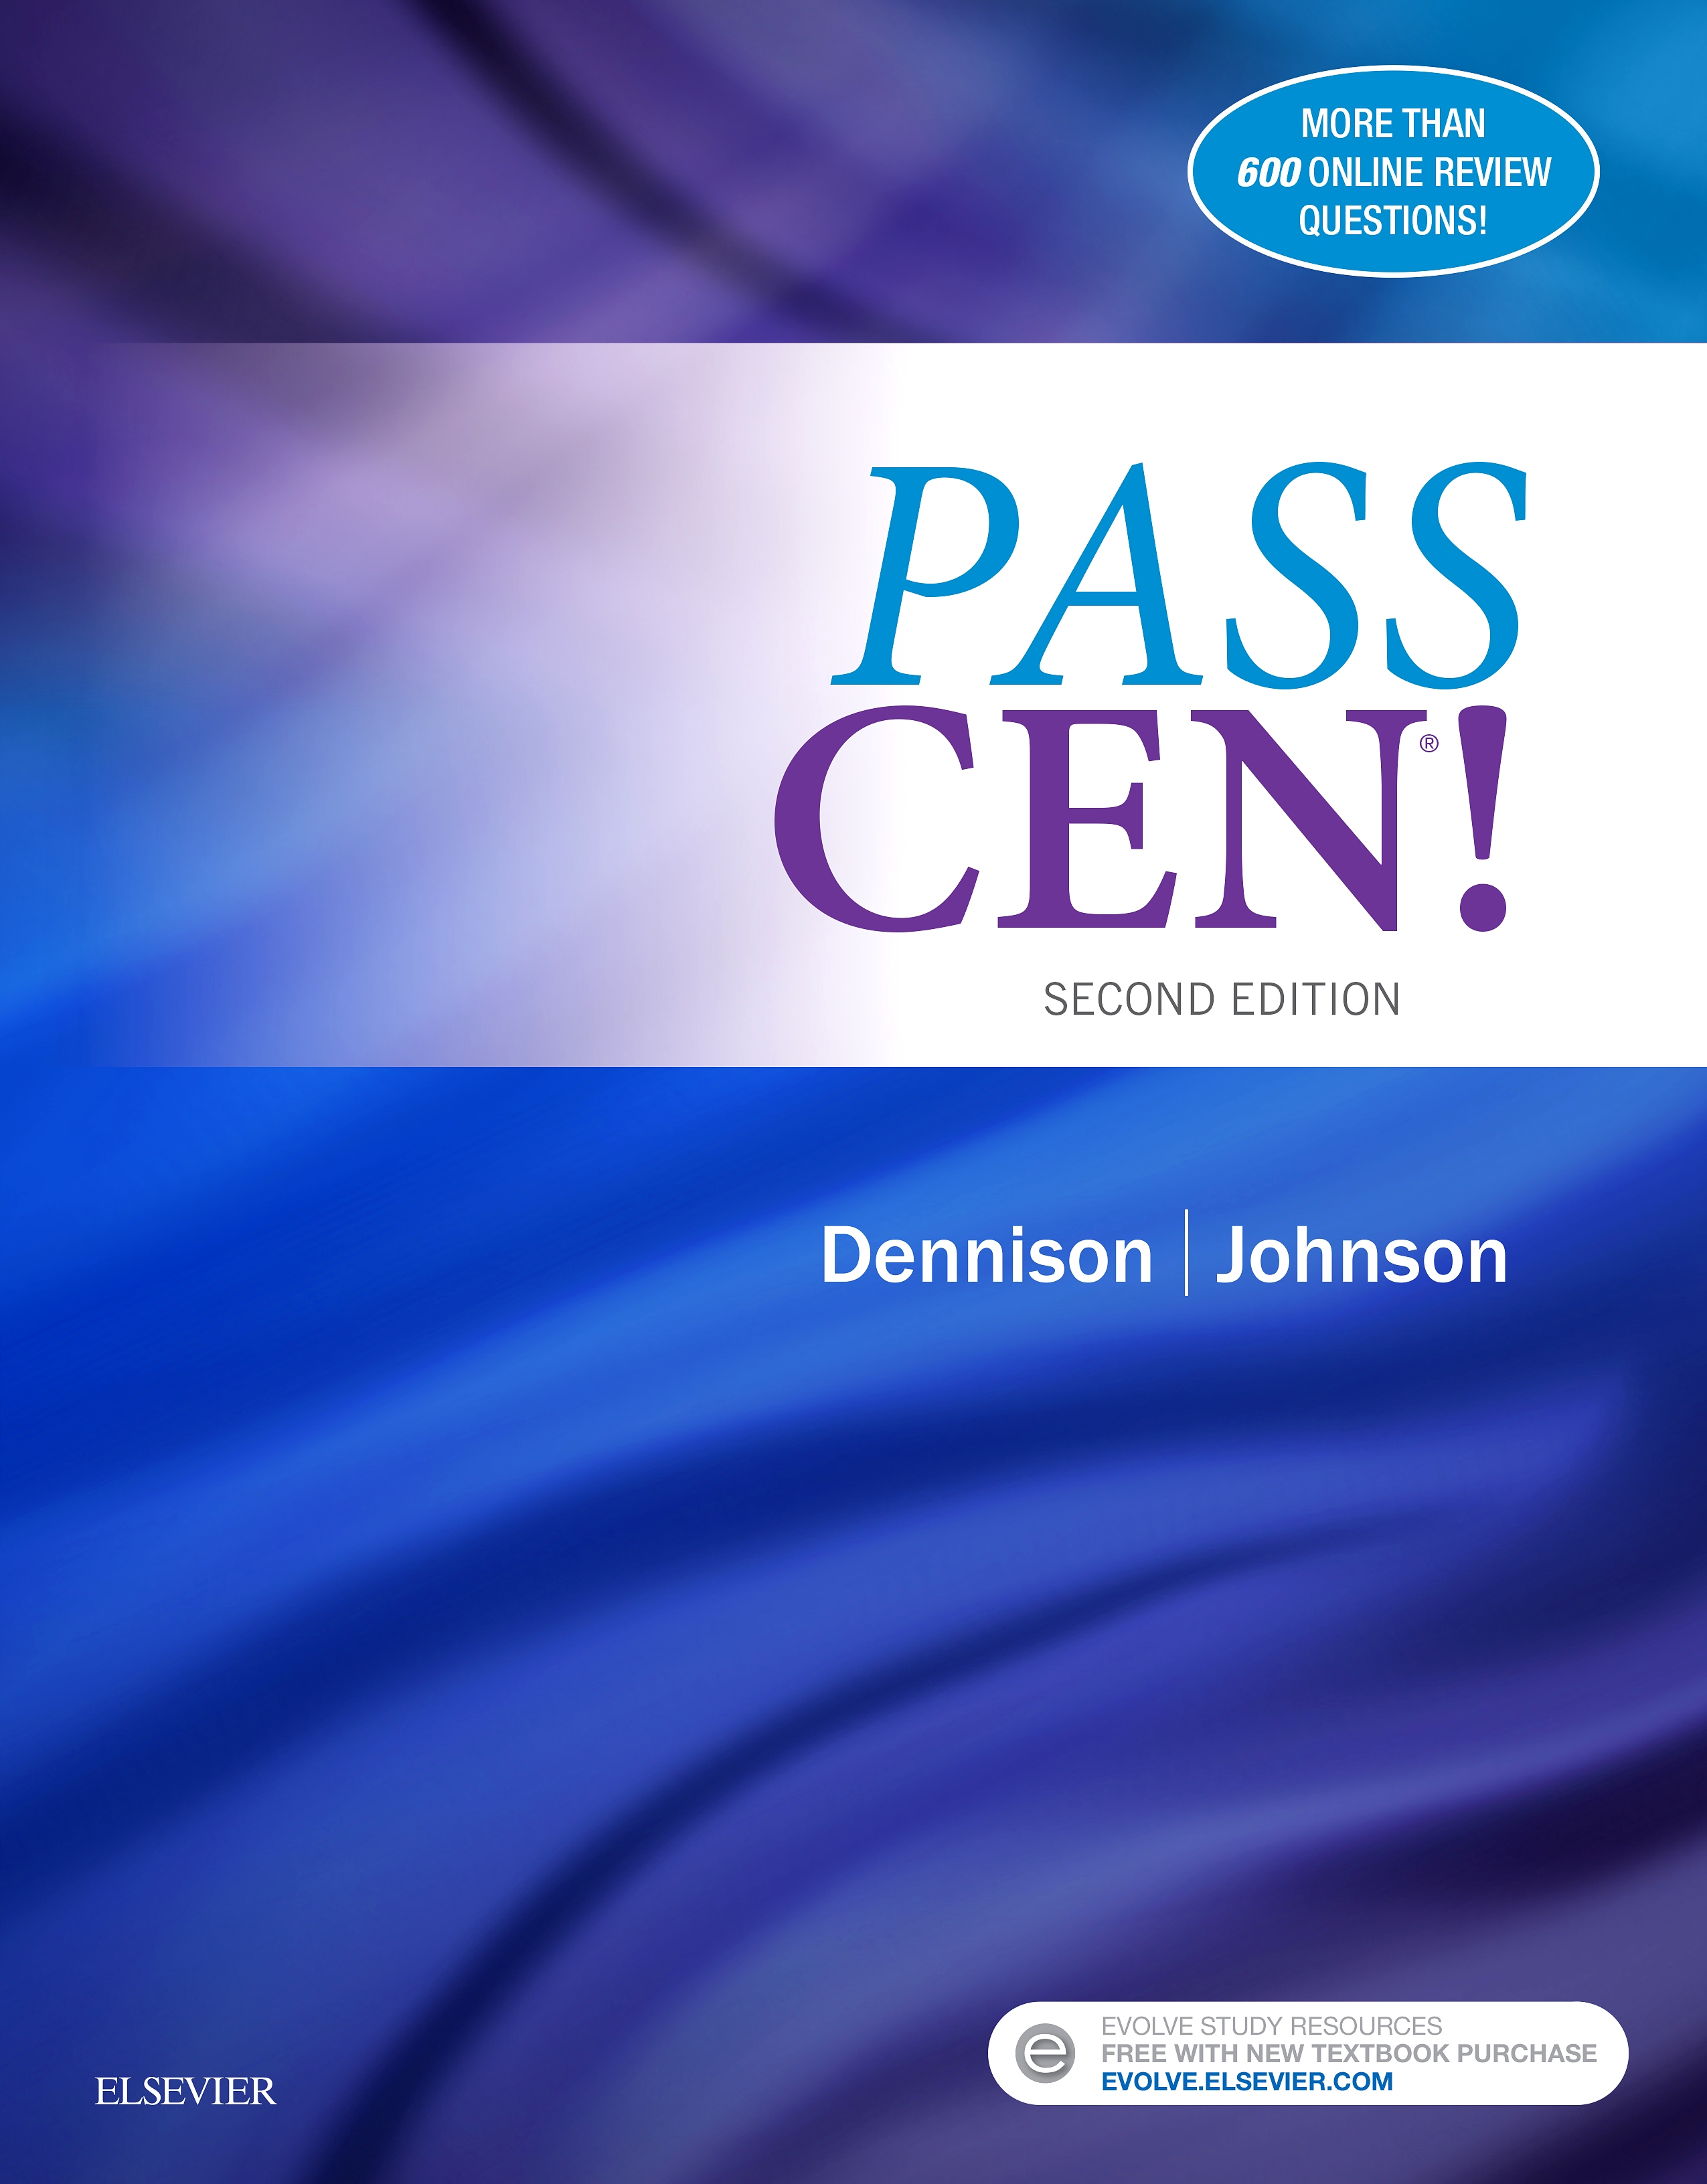 Evolve Resources for PASS CEN!, 2nd Edition